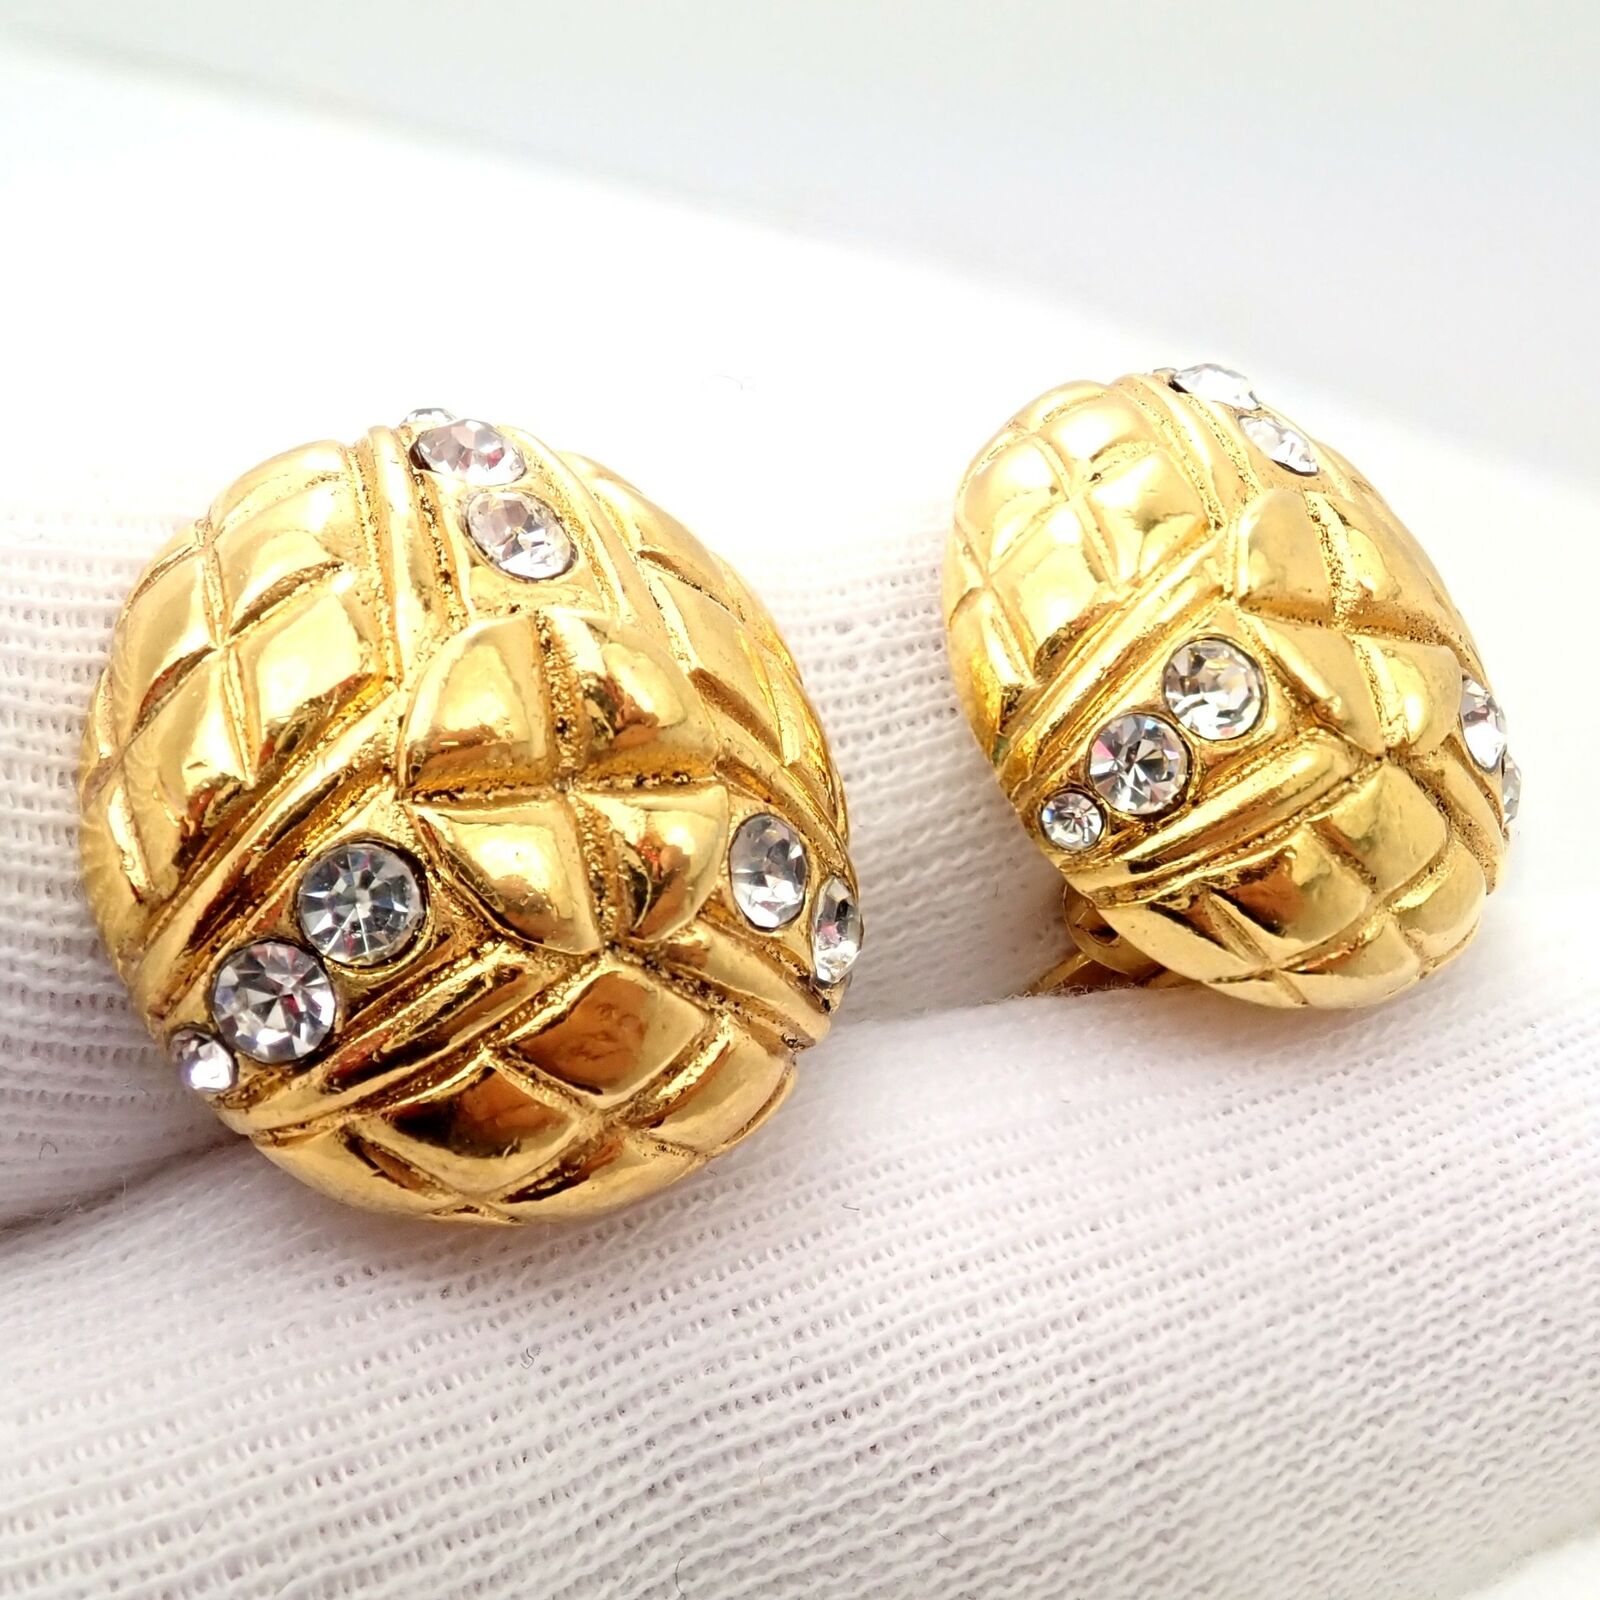 Chanel Jewelry & Watches:Vintage & Antique Jewelry:Earrings Rare! Vintage Chanel Paris France Crystal Earrings 1970's